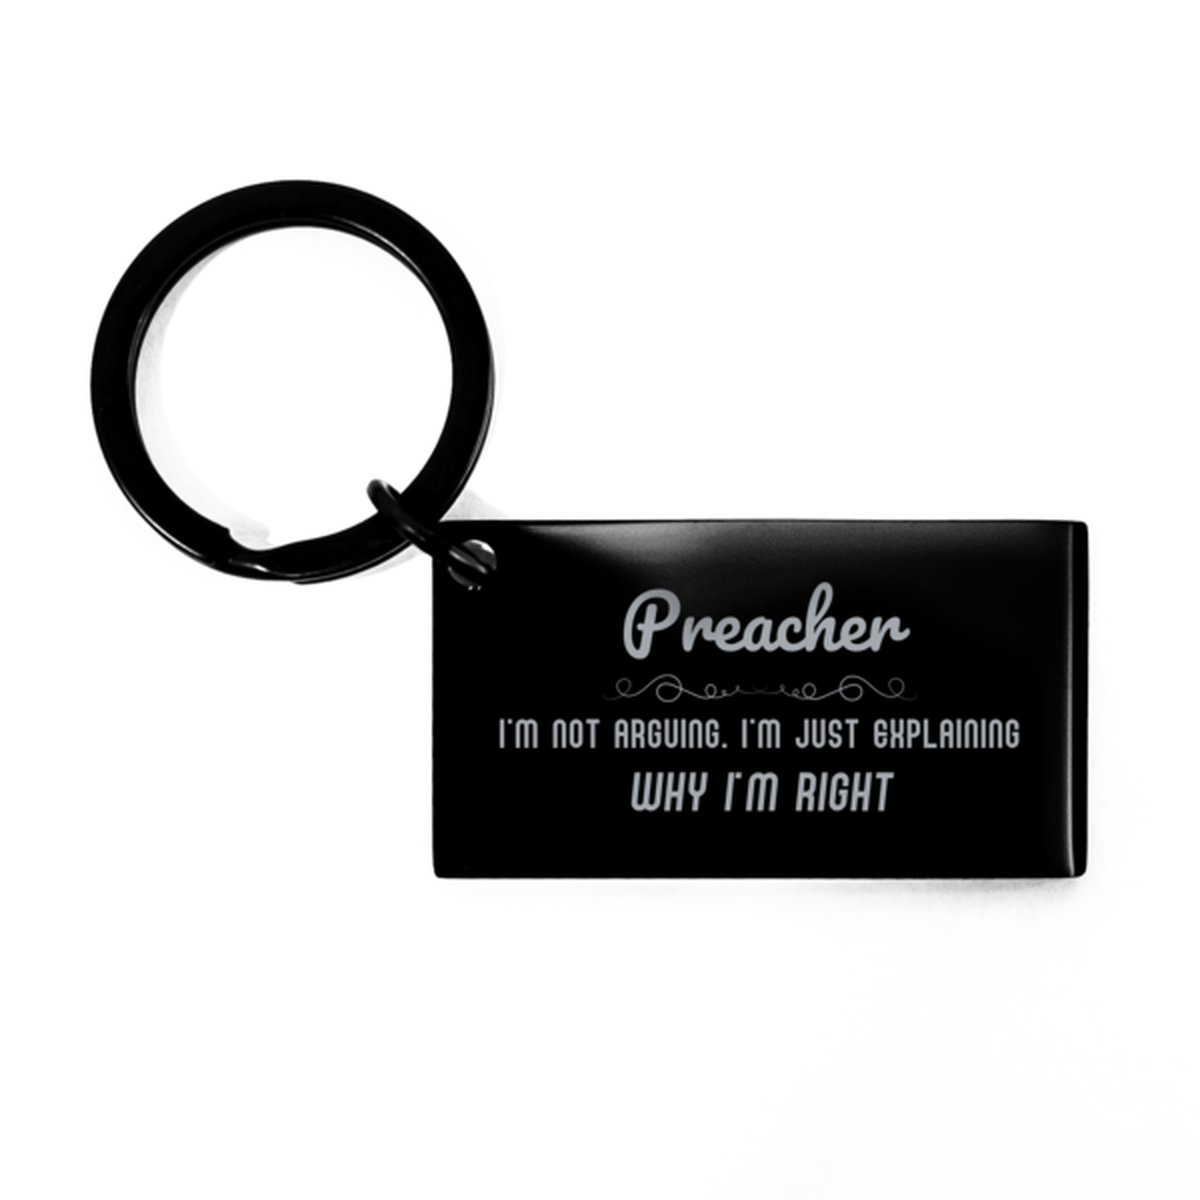 Preacher I'm not Arguing. I'm Just Explaining Why I'm RIGHT Keychain, Funny Saying Quote Preacher Gifts For Preacher Graduation Birthday Christmas Gifts for Men Women Coworker